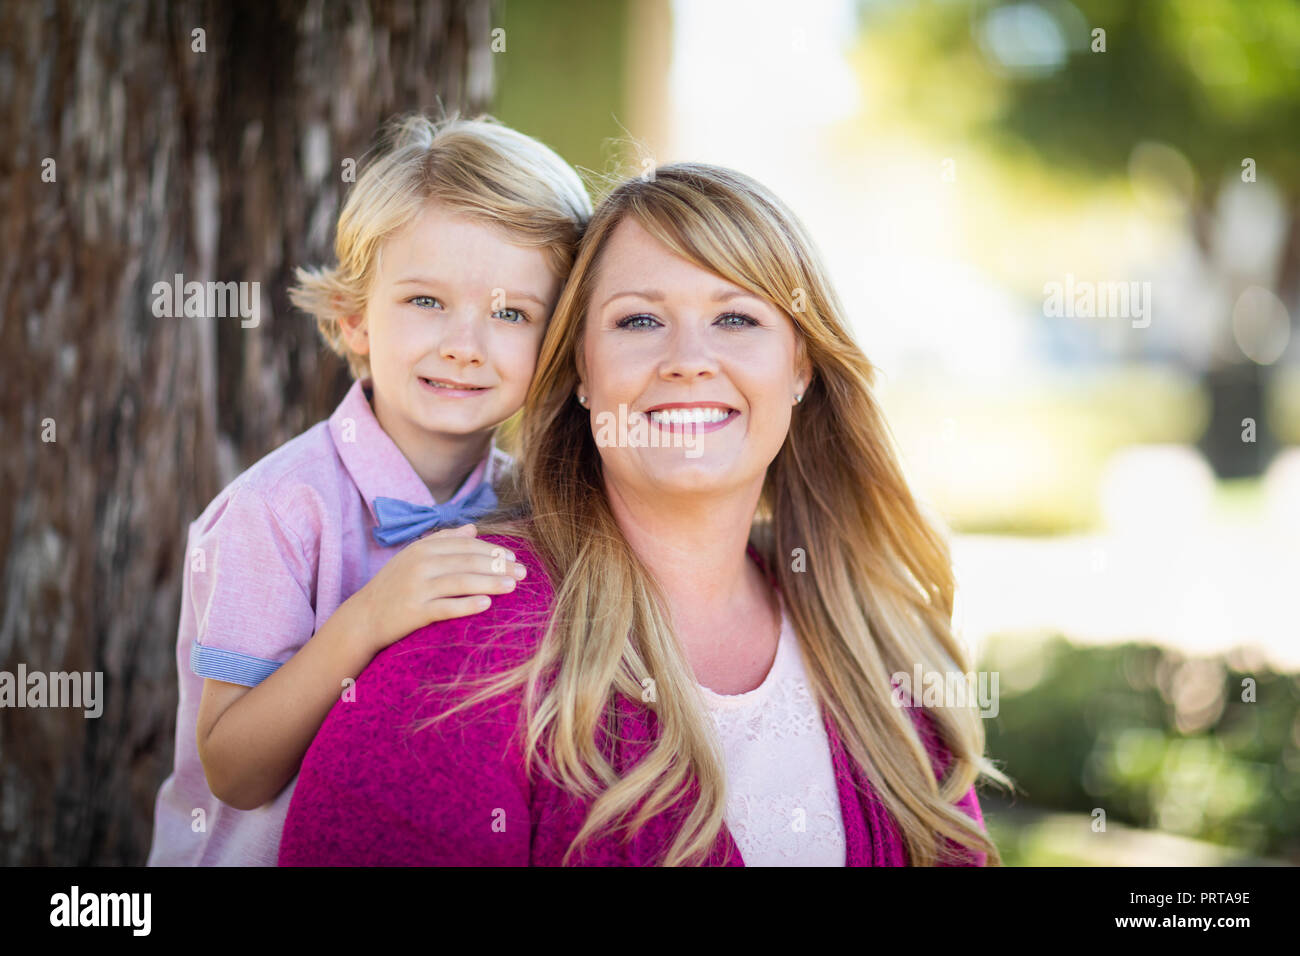 Young Caucasian Mother And Daughter Portrait At The Park. Stock Photo